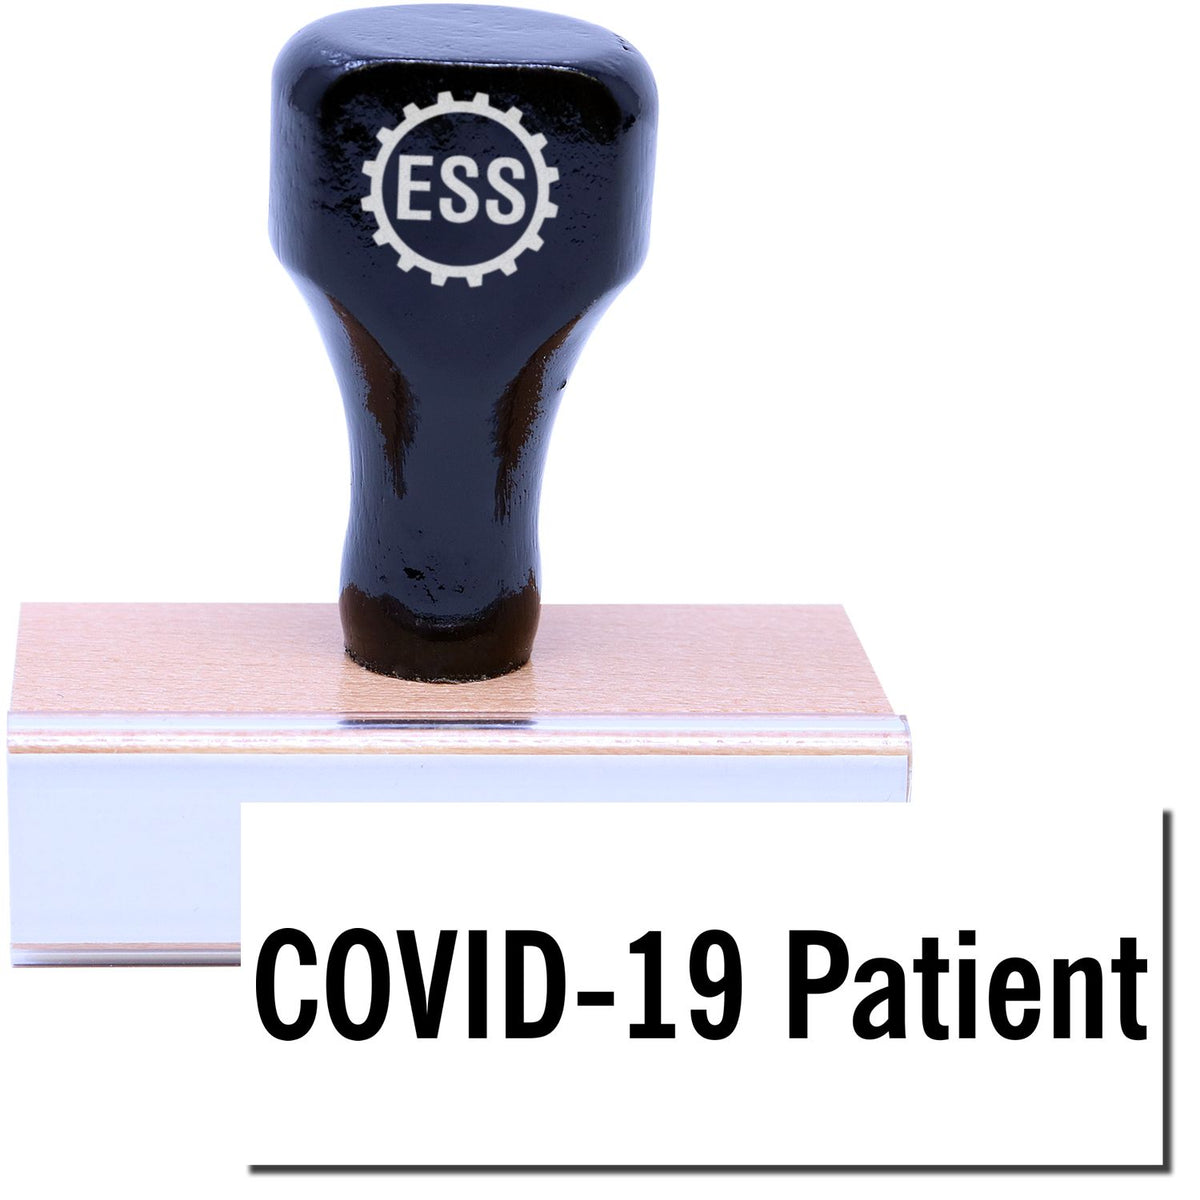 A stock office rubber stamp with a stamped image showing how the text &quot;COVID-19 Patient&quot; in a large font is displayed after stamping.